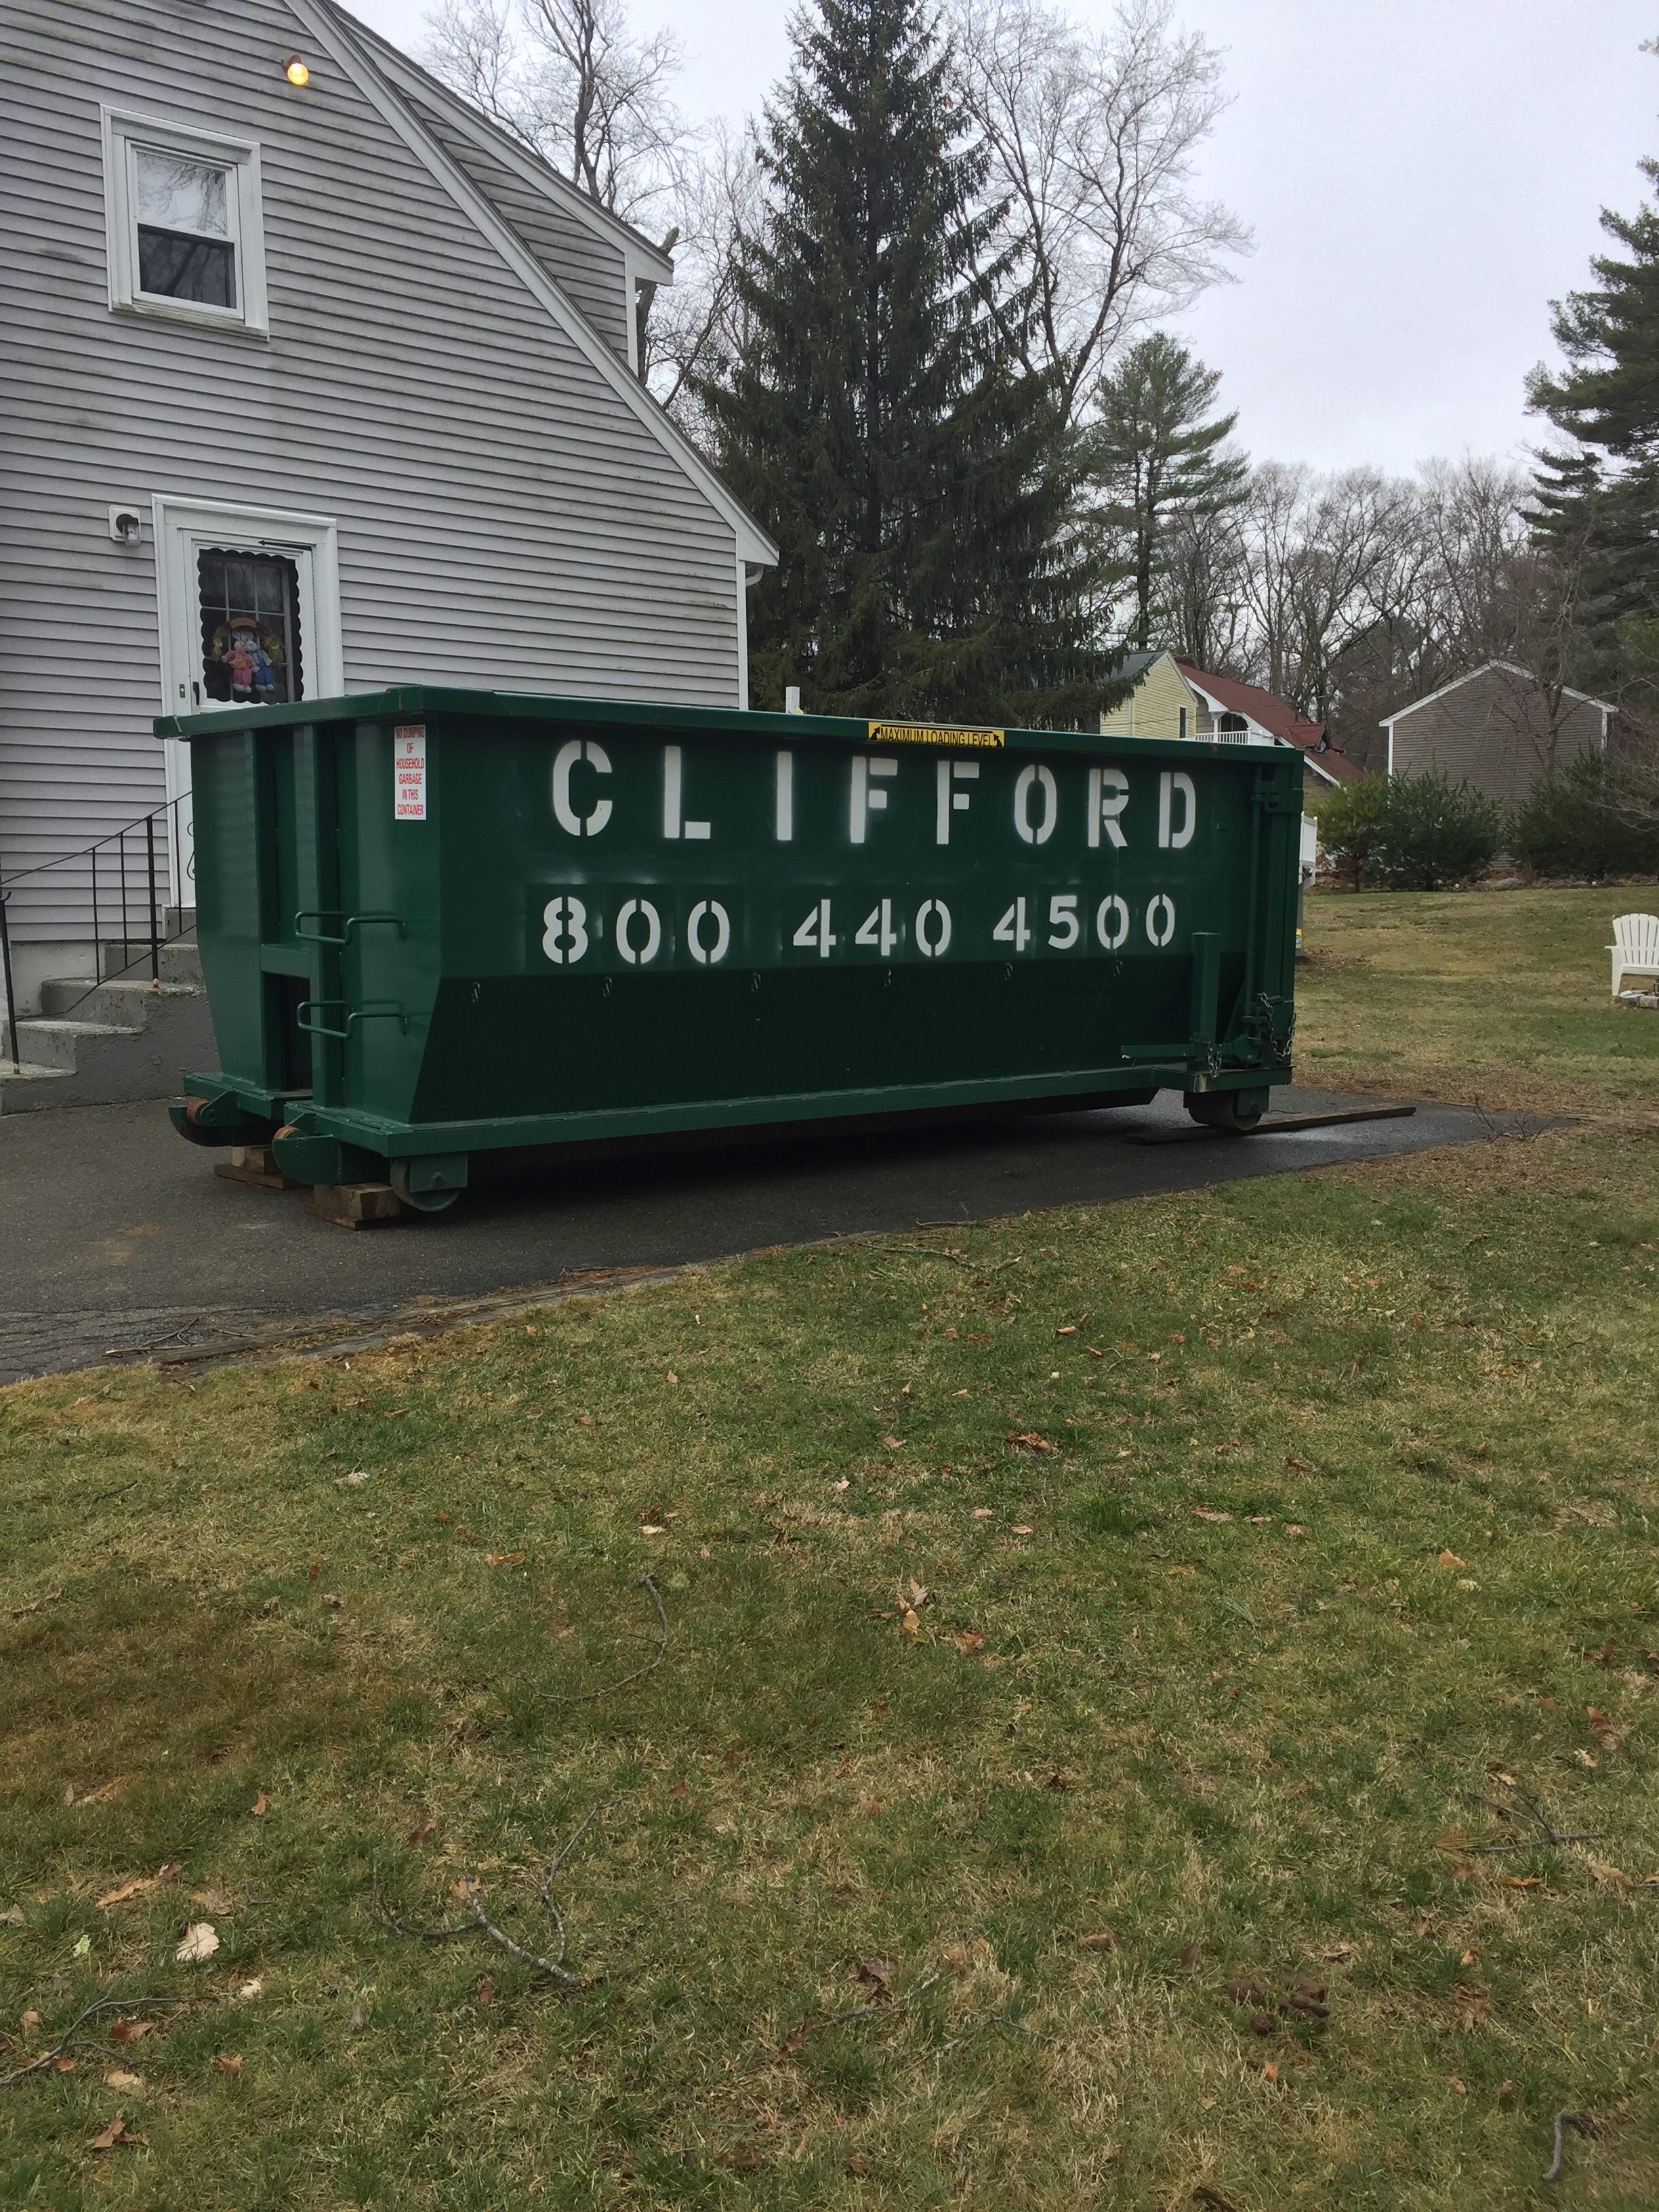 What Can You Fit In A Dumpster?